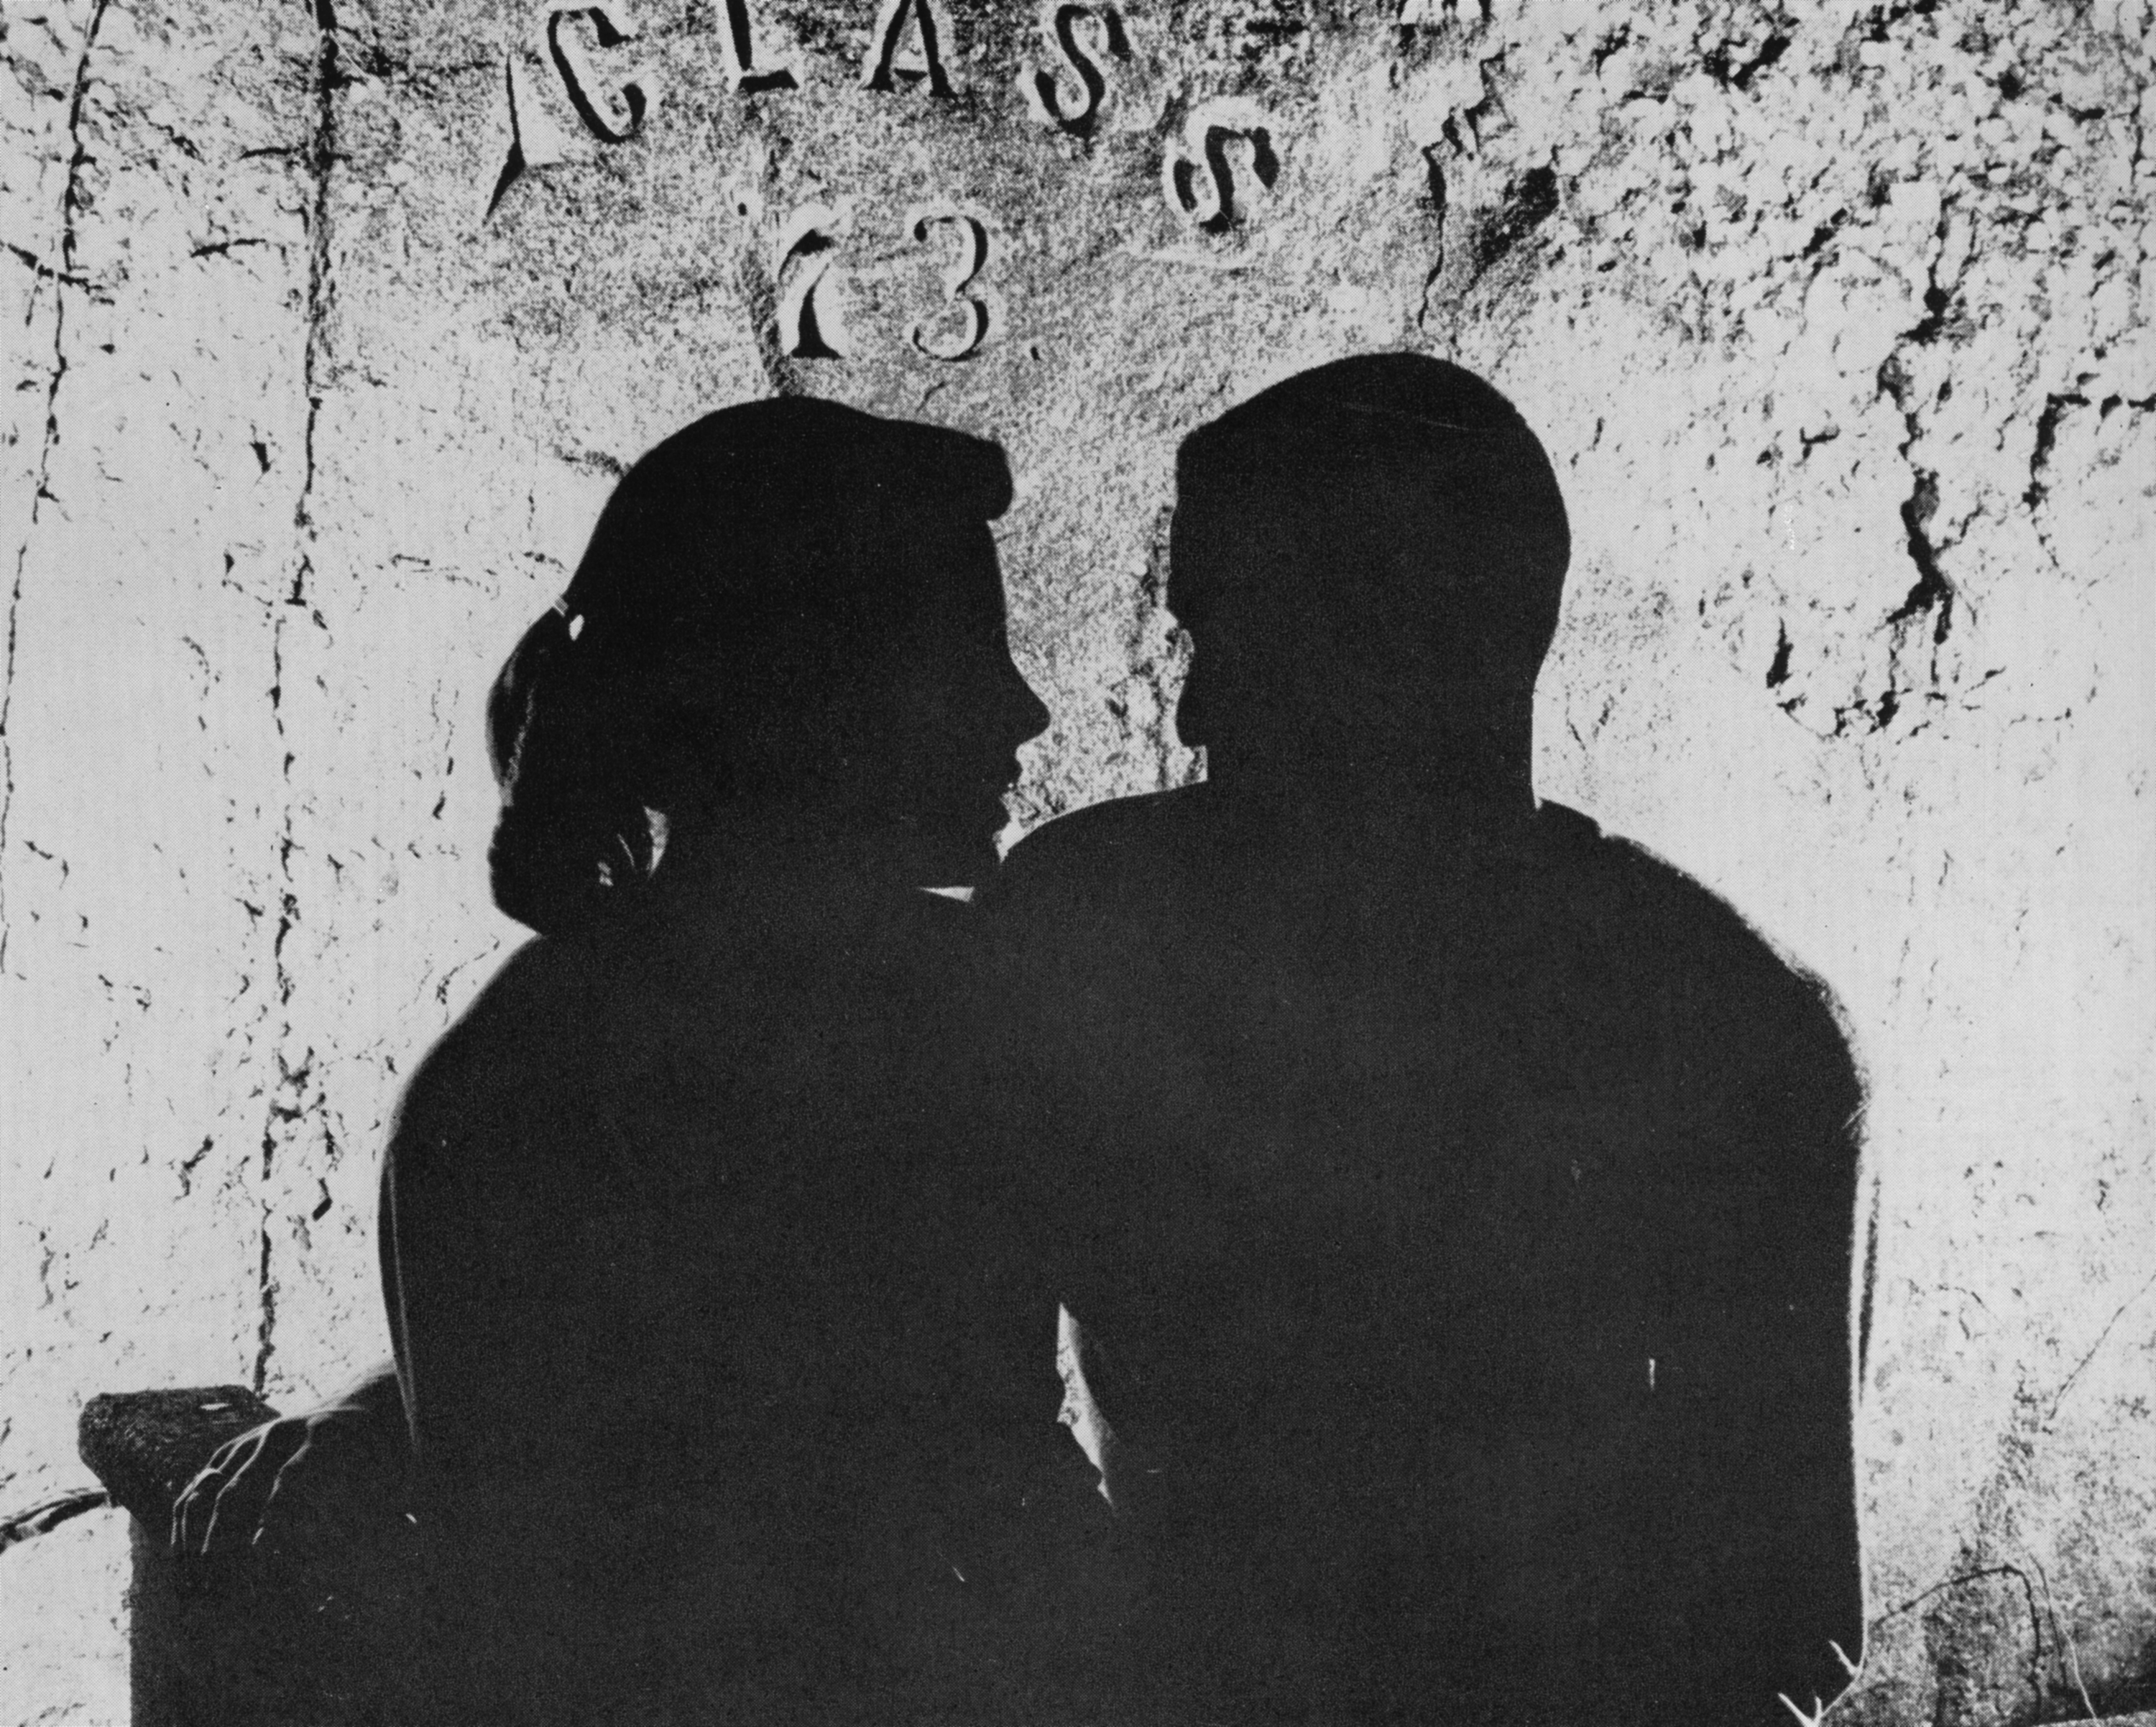 Silhouette of couple in front of the Rock, ca. 1955